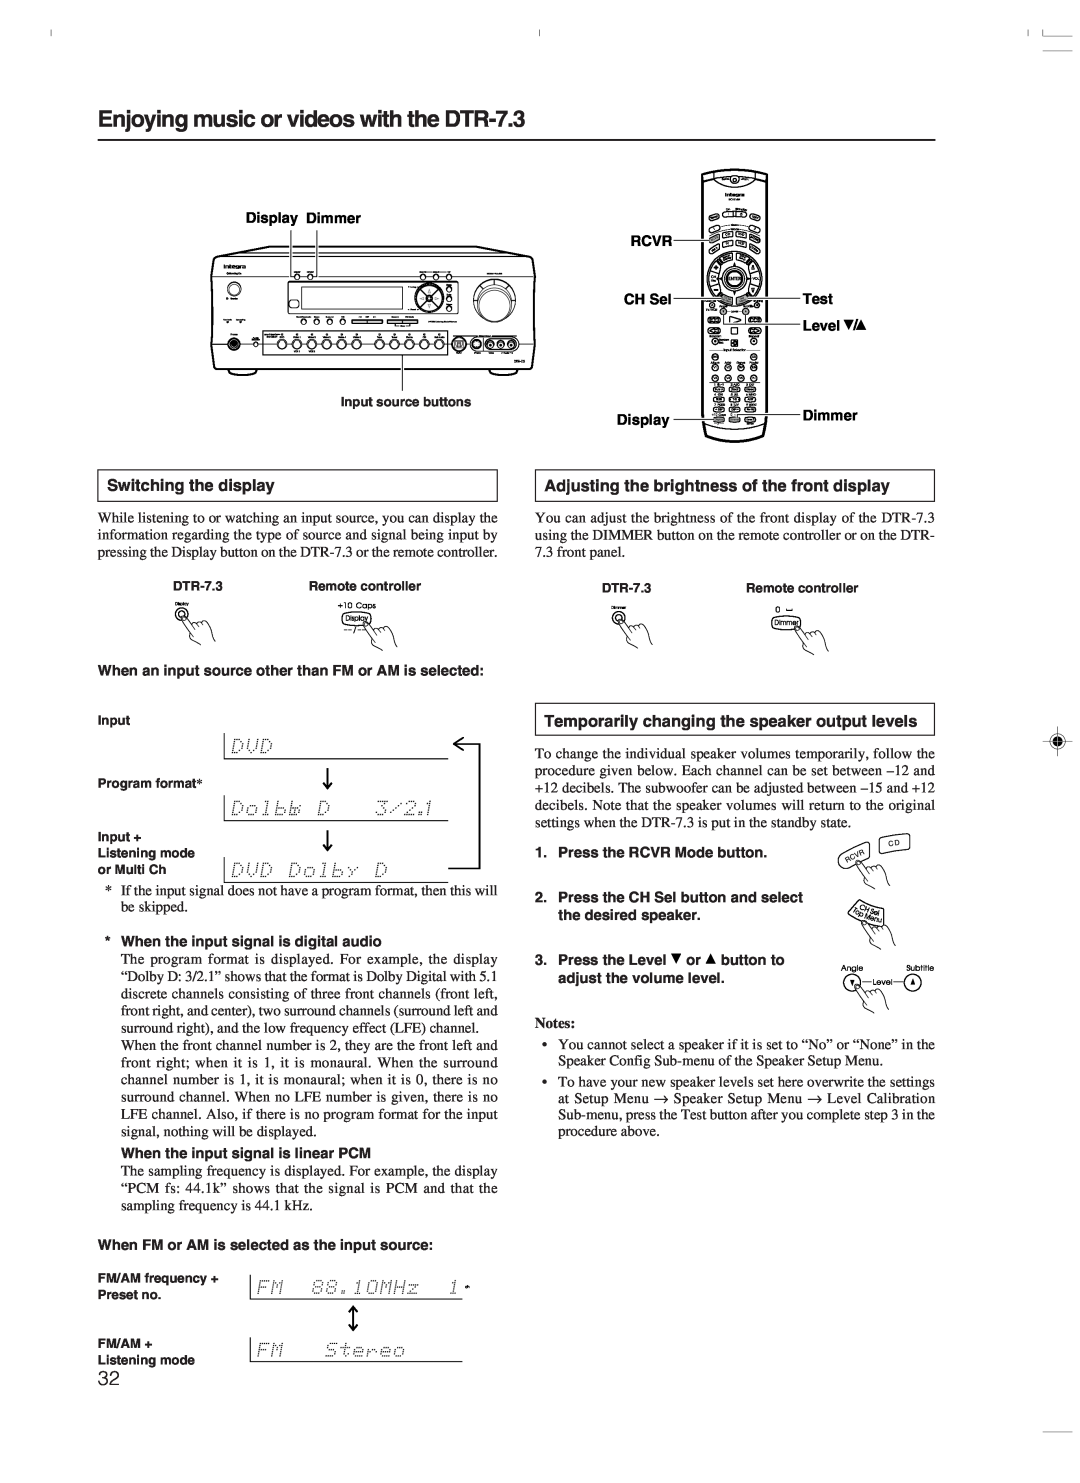 Integra DTR-7.3 instruction manual Switching the display, Adjusting the brightness of the front display, Display Dimmer 